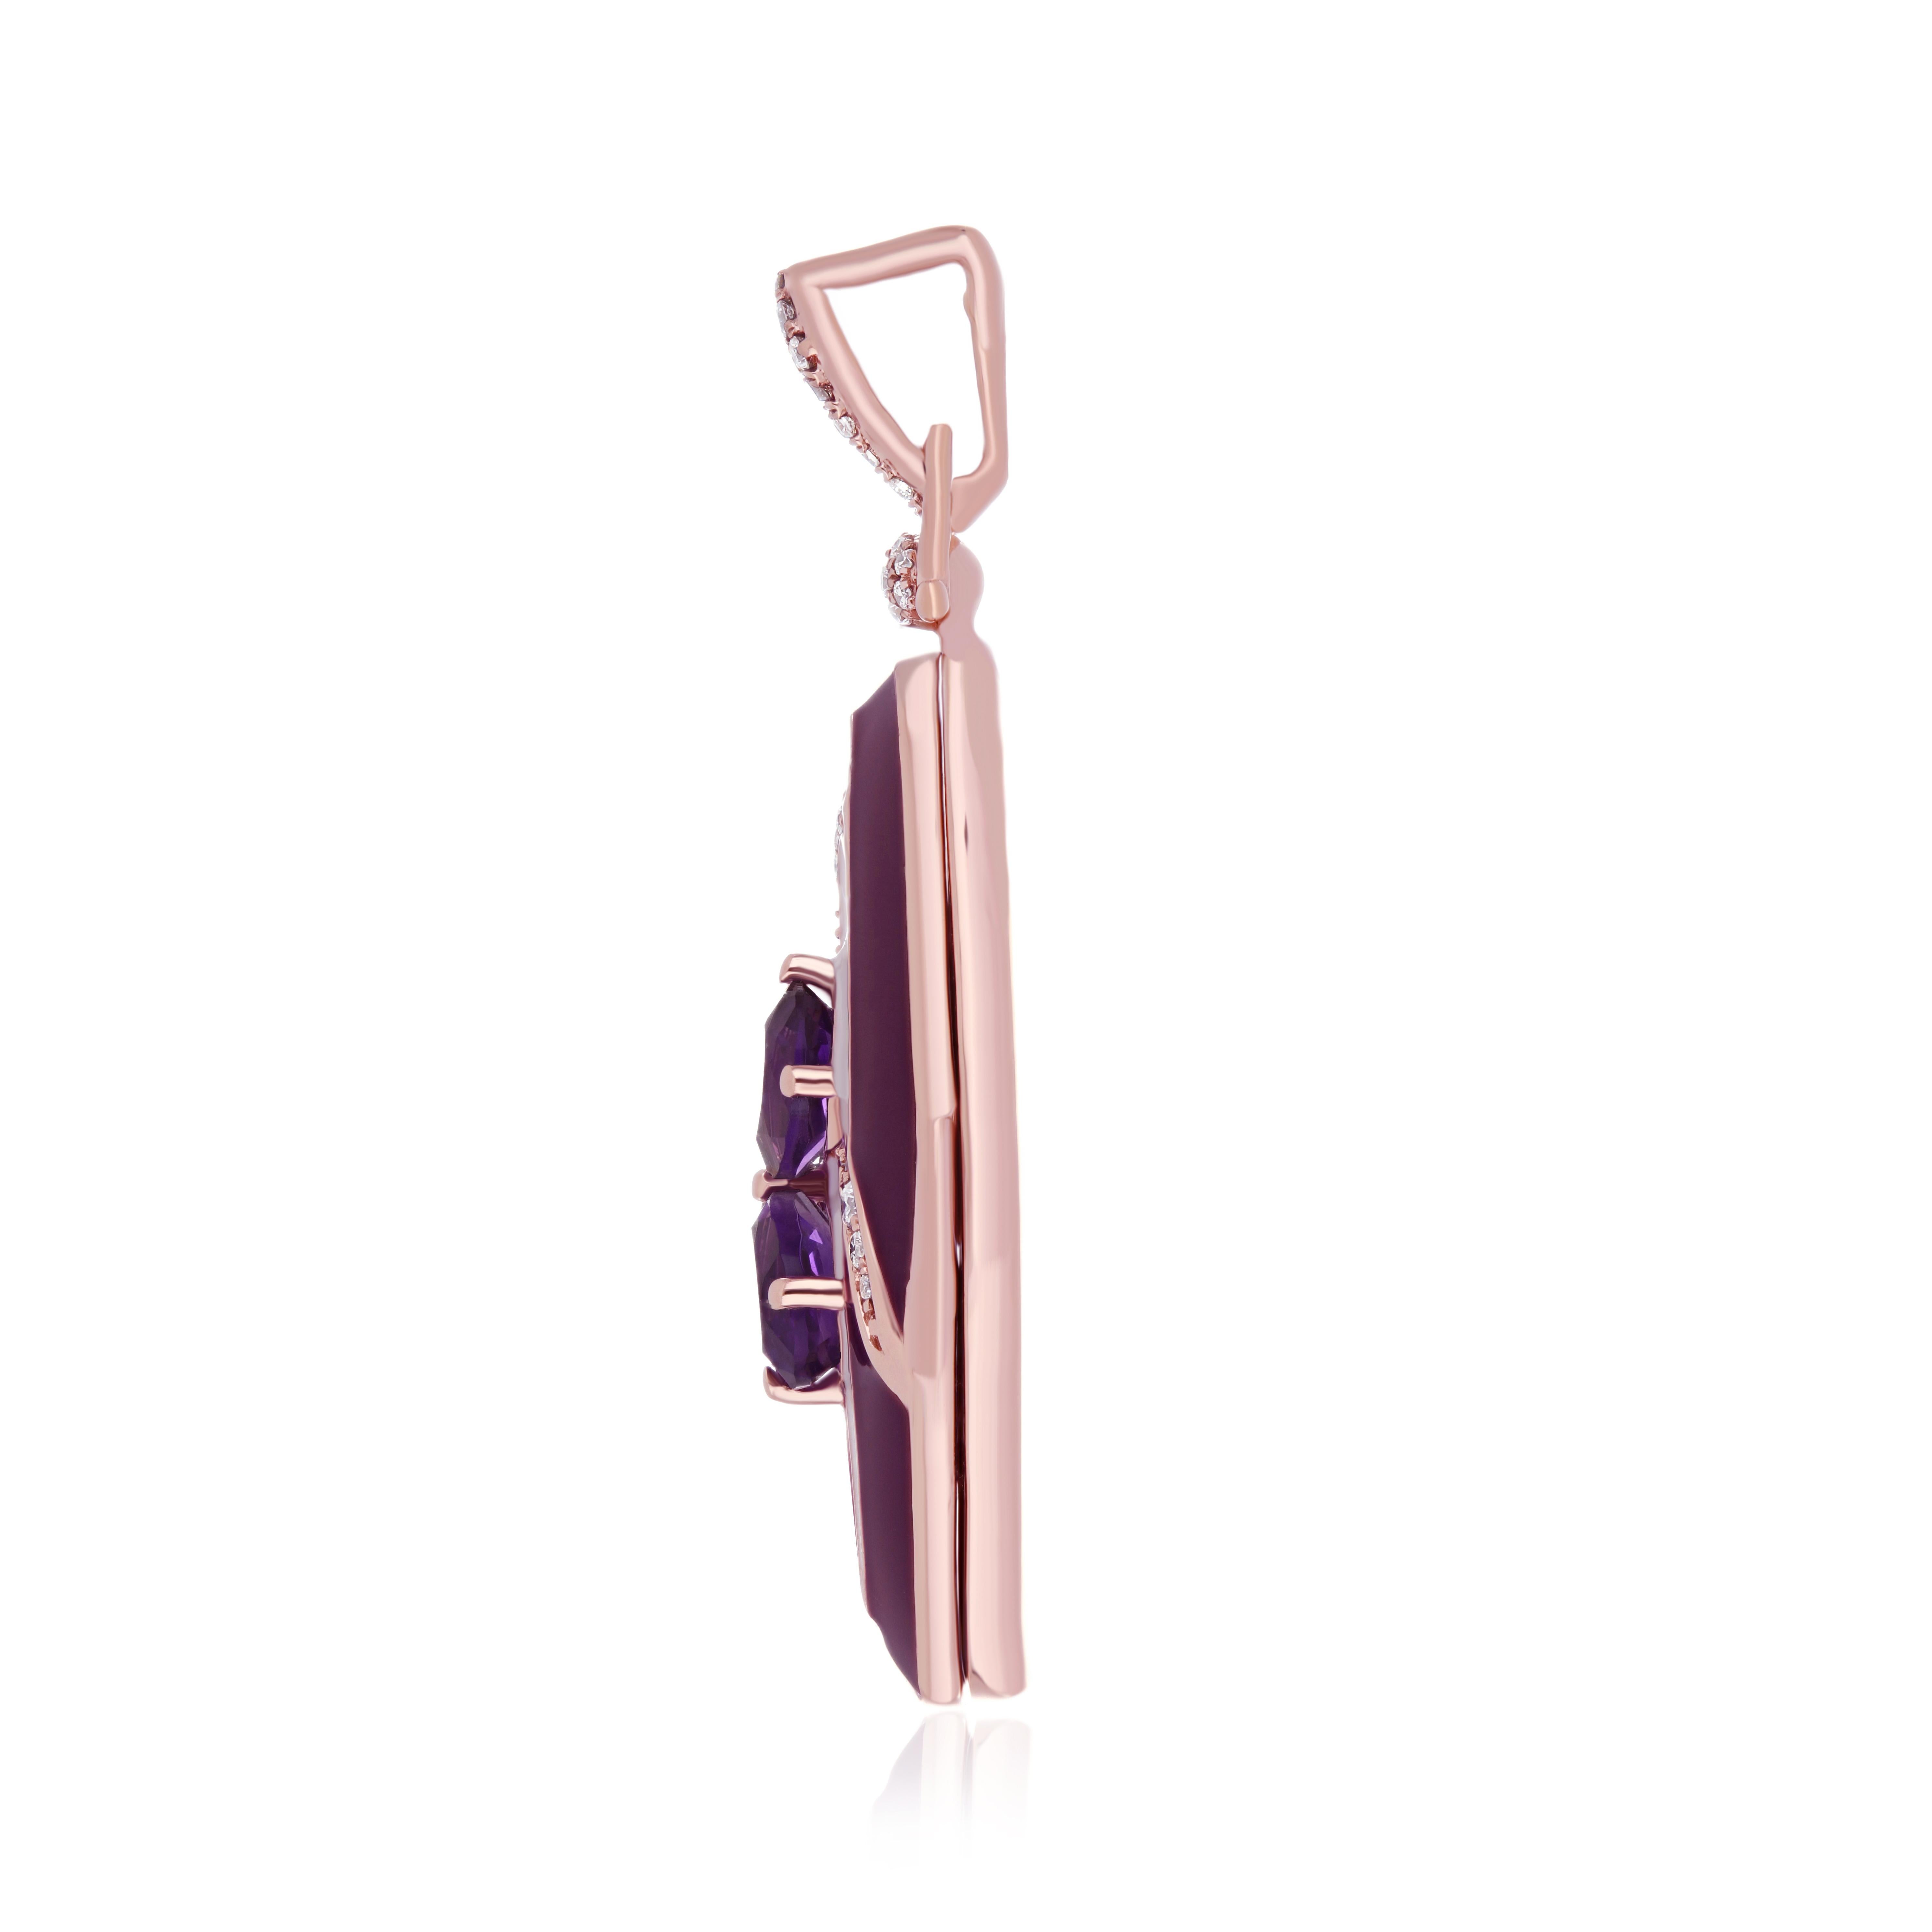 Elegant and Exquisitely detailed Photo Box Gold Pendant, center set with 1.48Ct Pear Shape Amethyst surrounded by White & Purple Enamel and accented with micro pave Diamonds, weighing approx. 0.20 Cts. total carat weight. This PhotoBox pendant has a